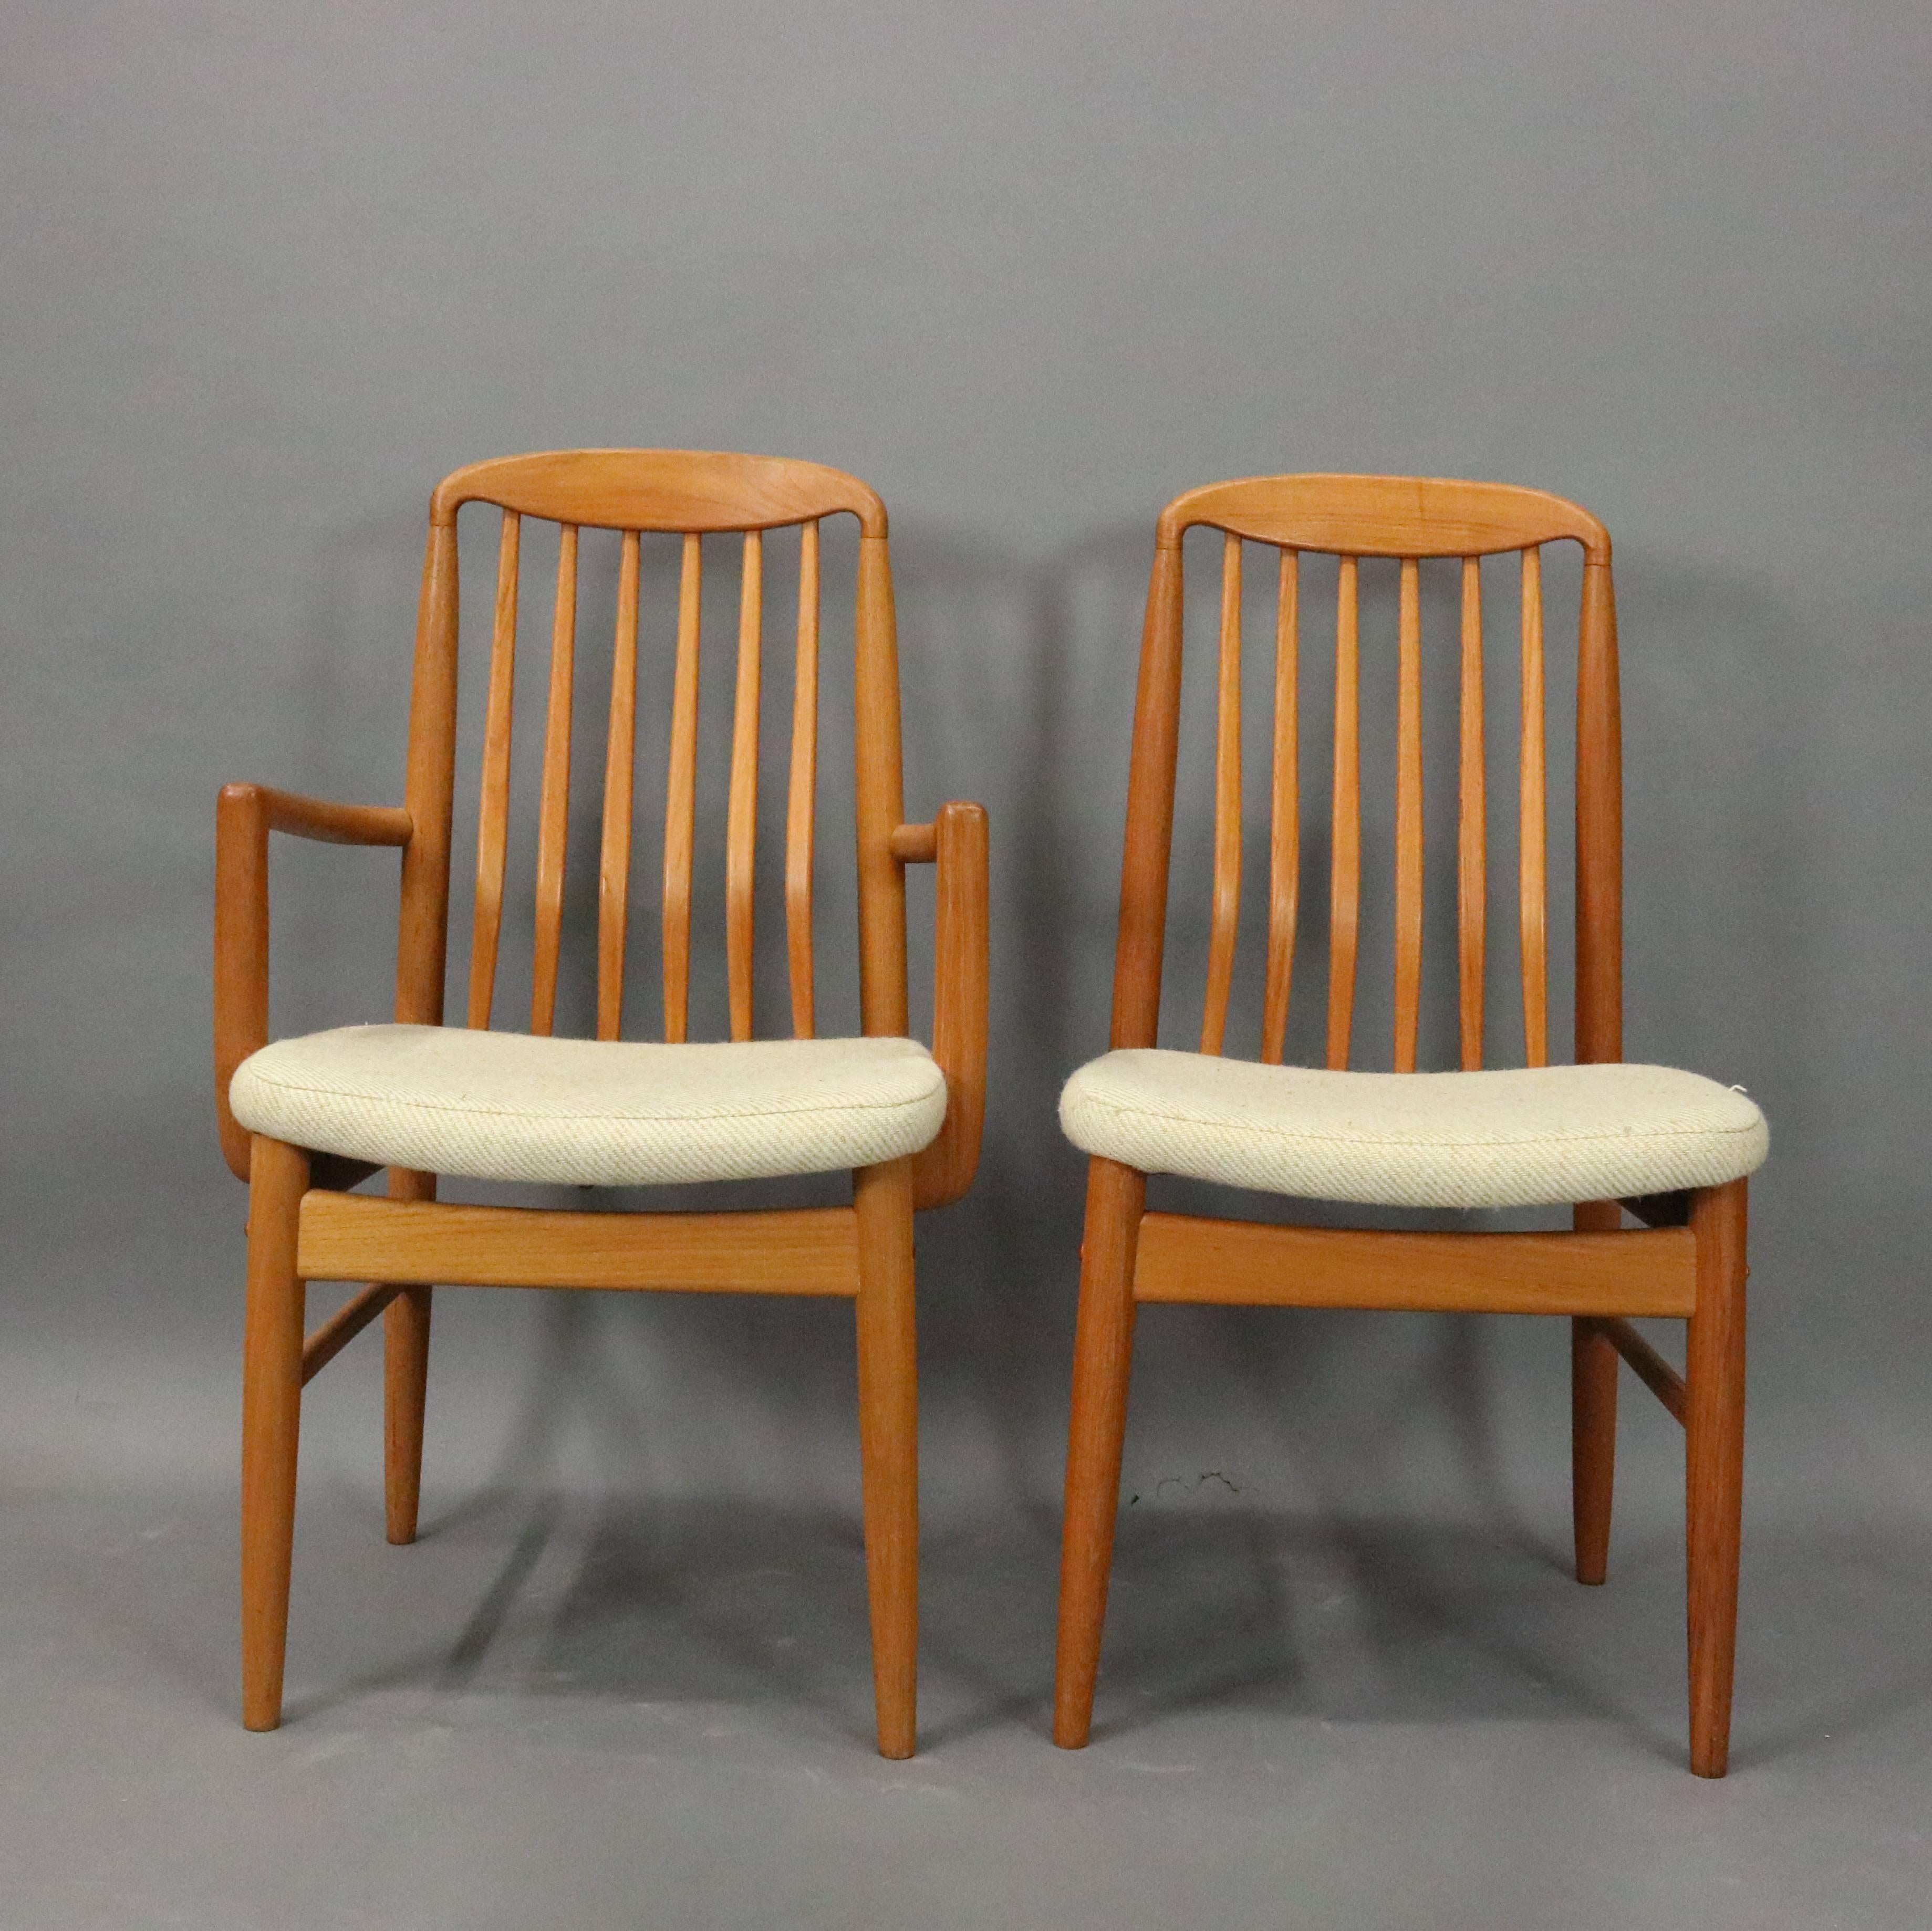 Mid-Century Danish Modern teak dining set includes expandable table (two leaves) and six upholstered slat back chairs, circa 1960

Measures: 29